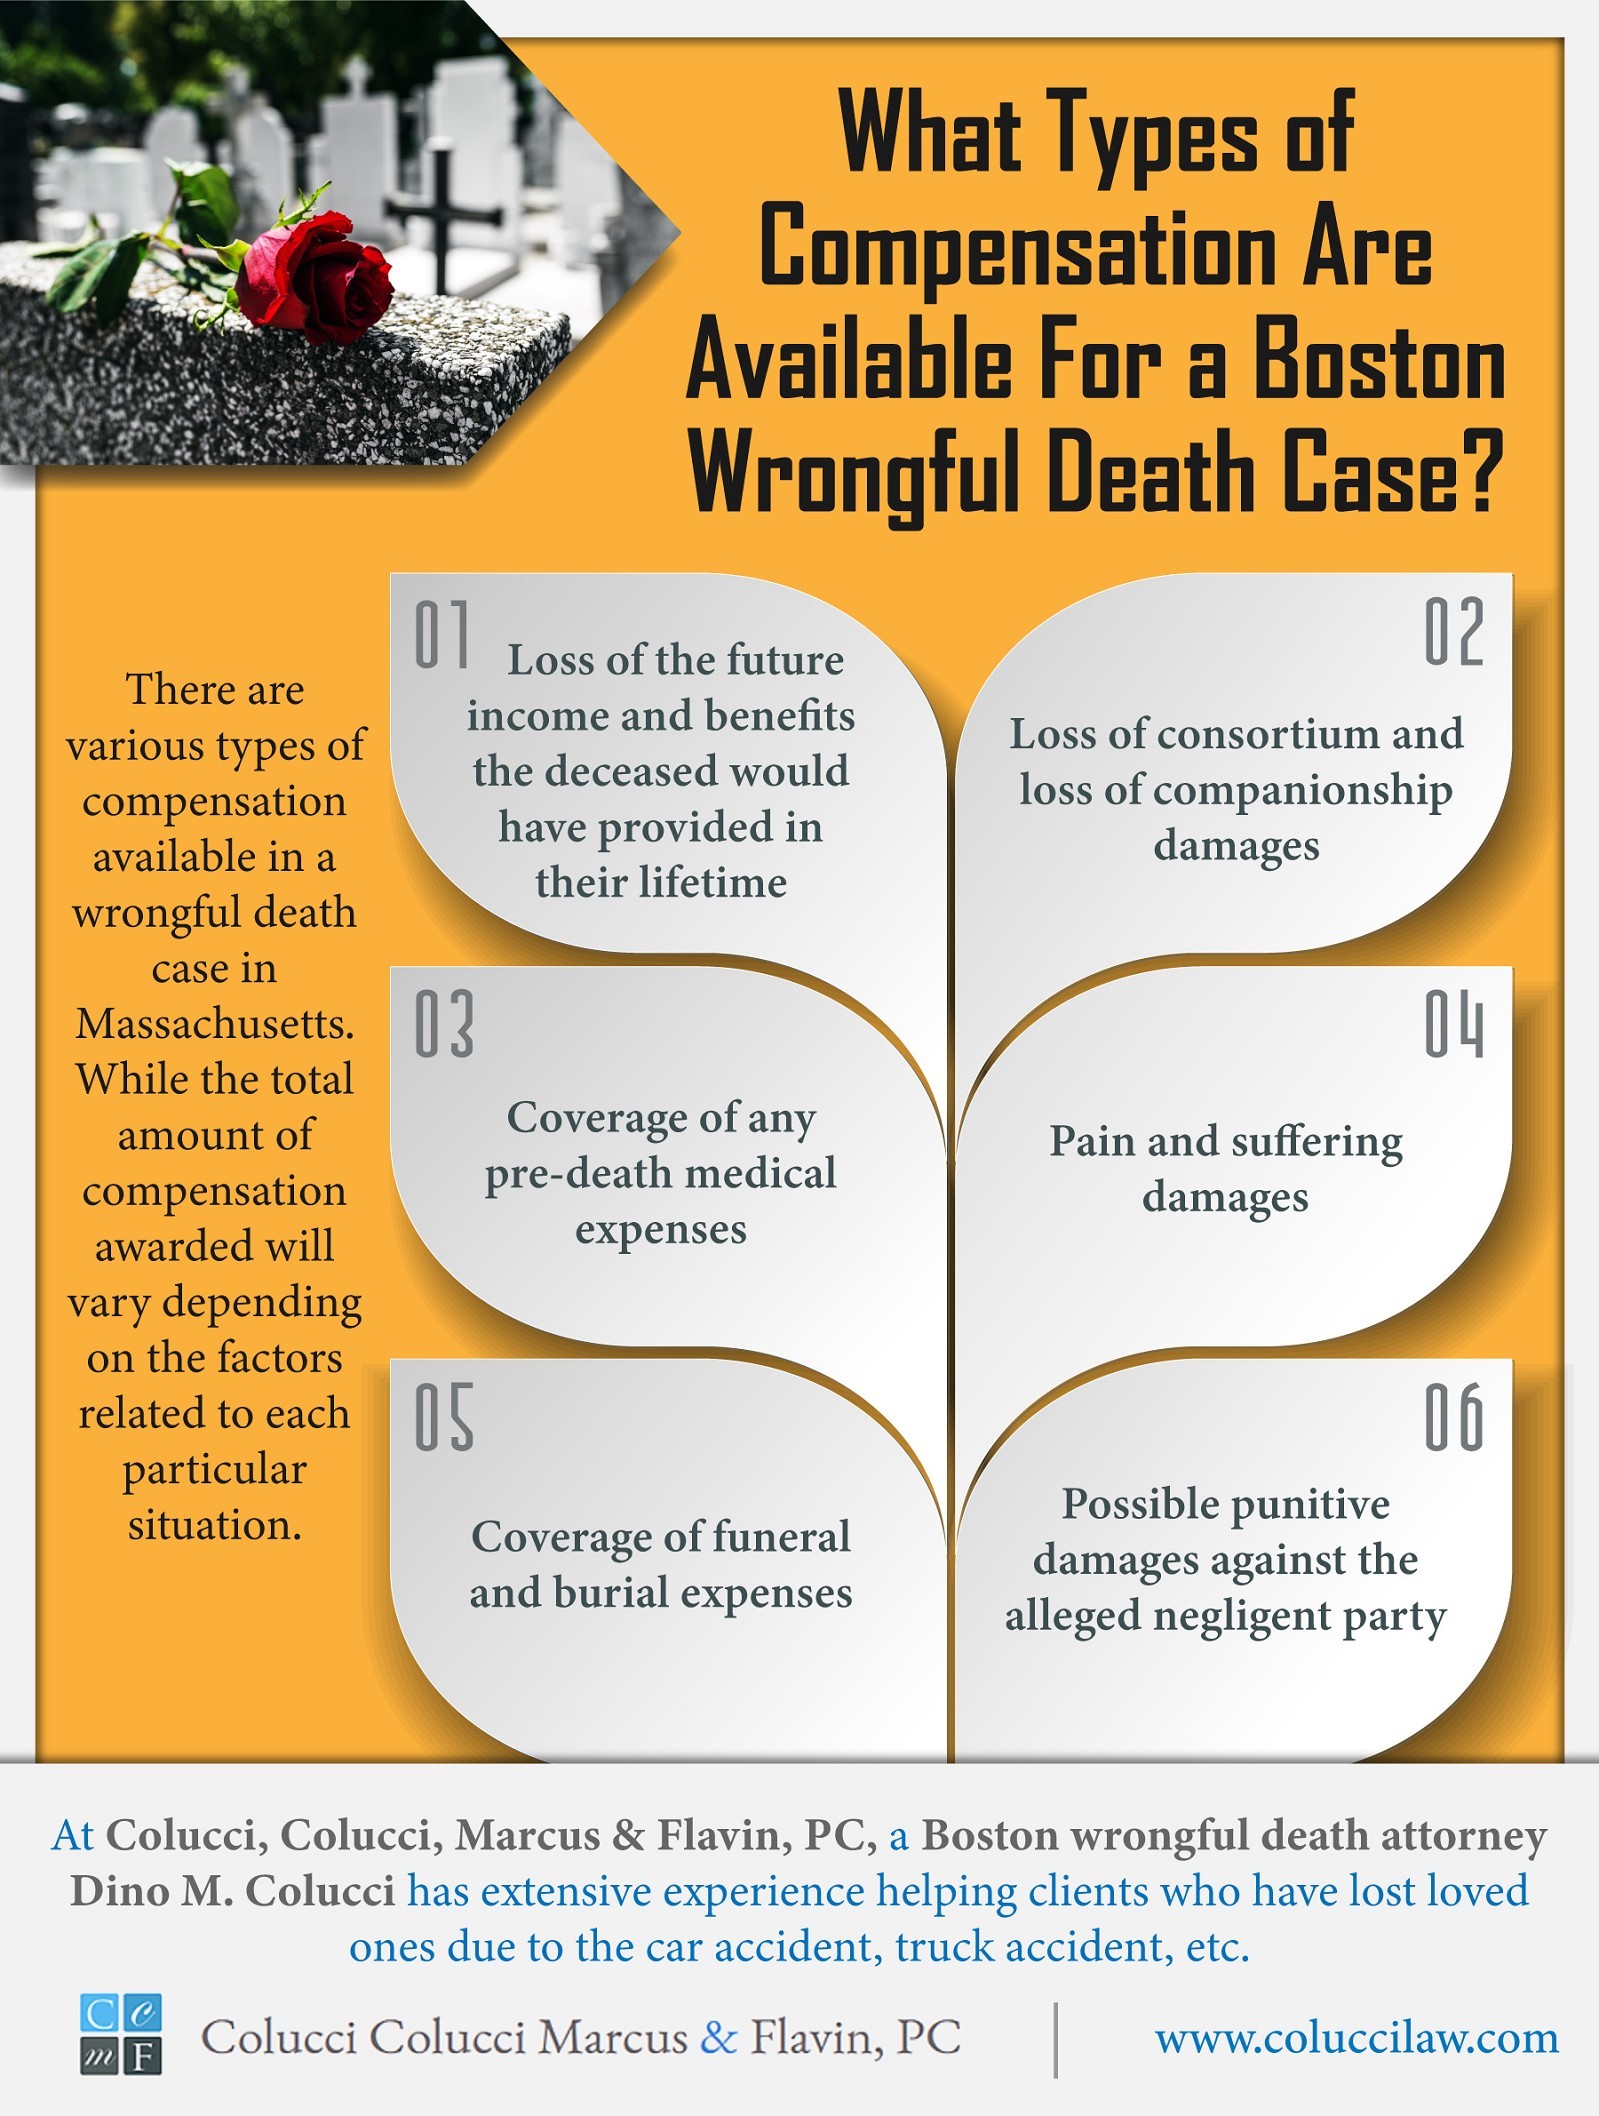 What Types Of Compensation Are Available For A Boston Wrongful Death Case?